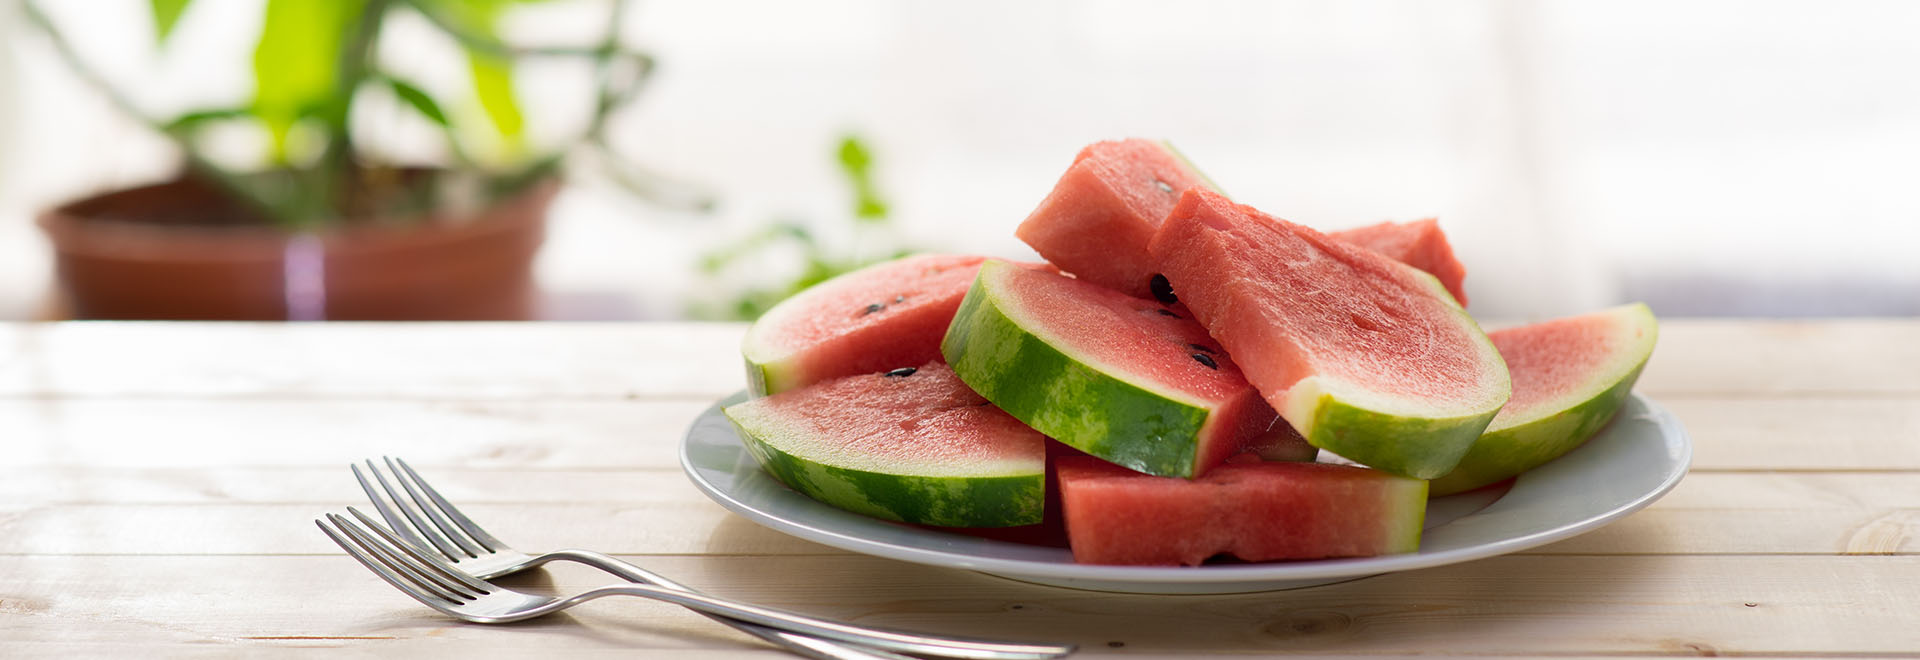 nutritional-values-of-watermelons